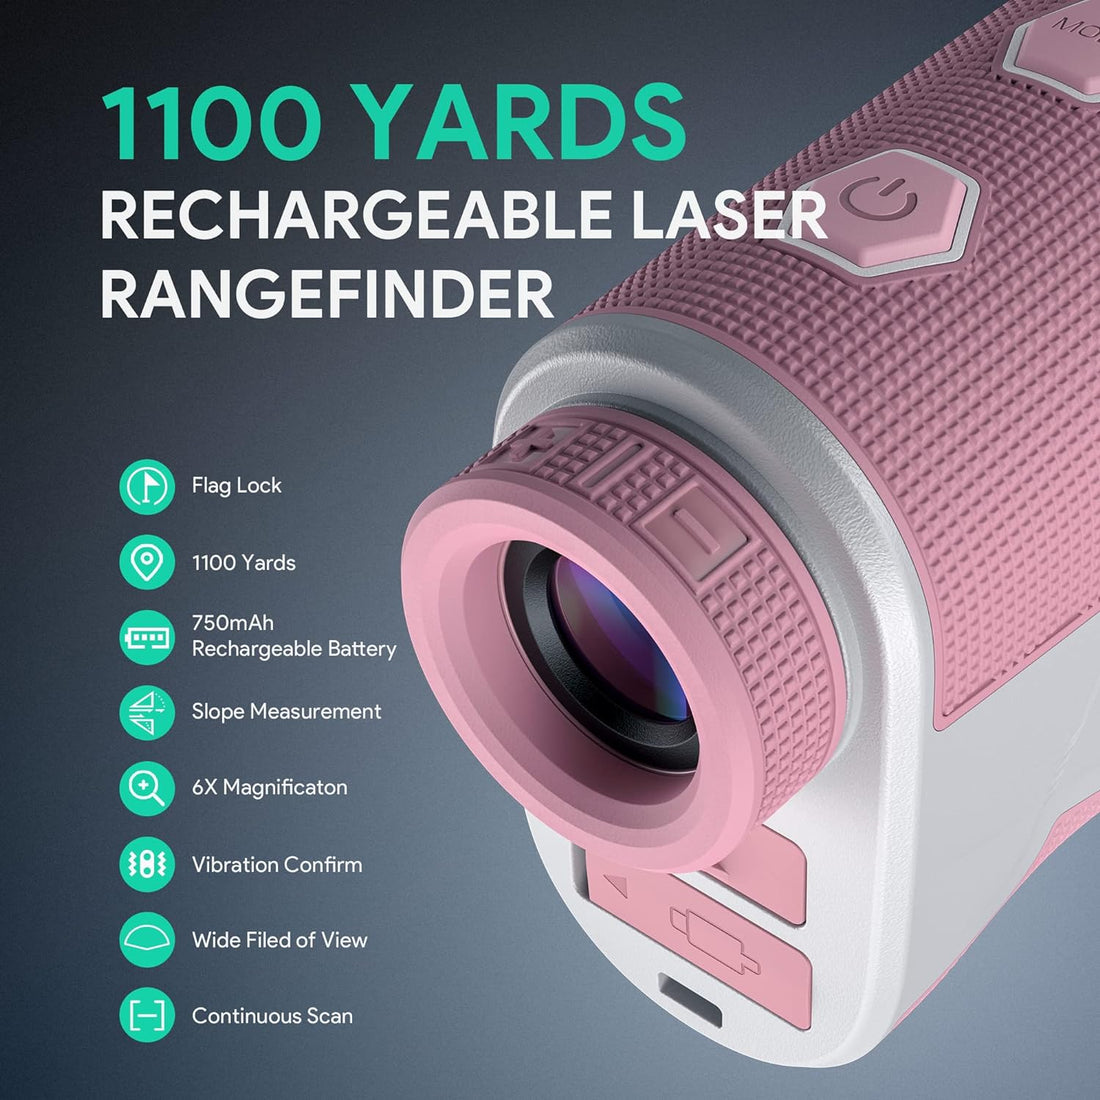 Golf Rangefinder with Slope, THGOLF 1100 Yards Rechargeable Golf Laser Rangefinder with Flag Acquisition, Pulse Vibration and Fast Focus System, 6X Magnification, ±1 Yard Accuracy